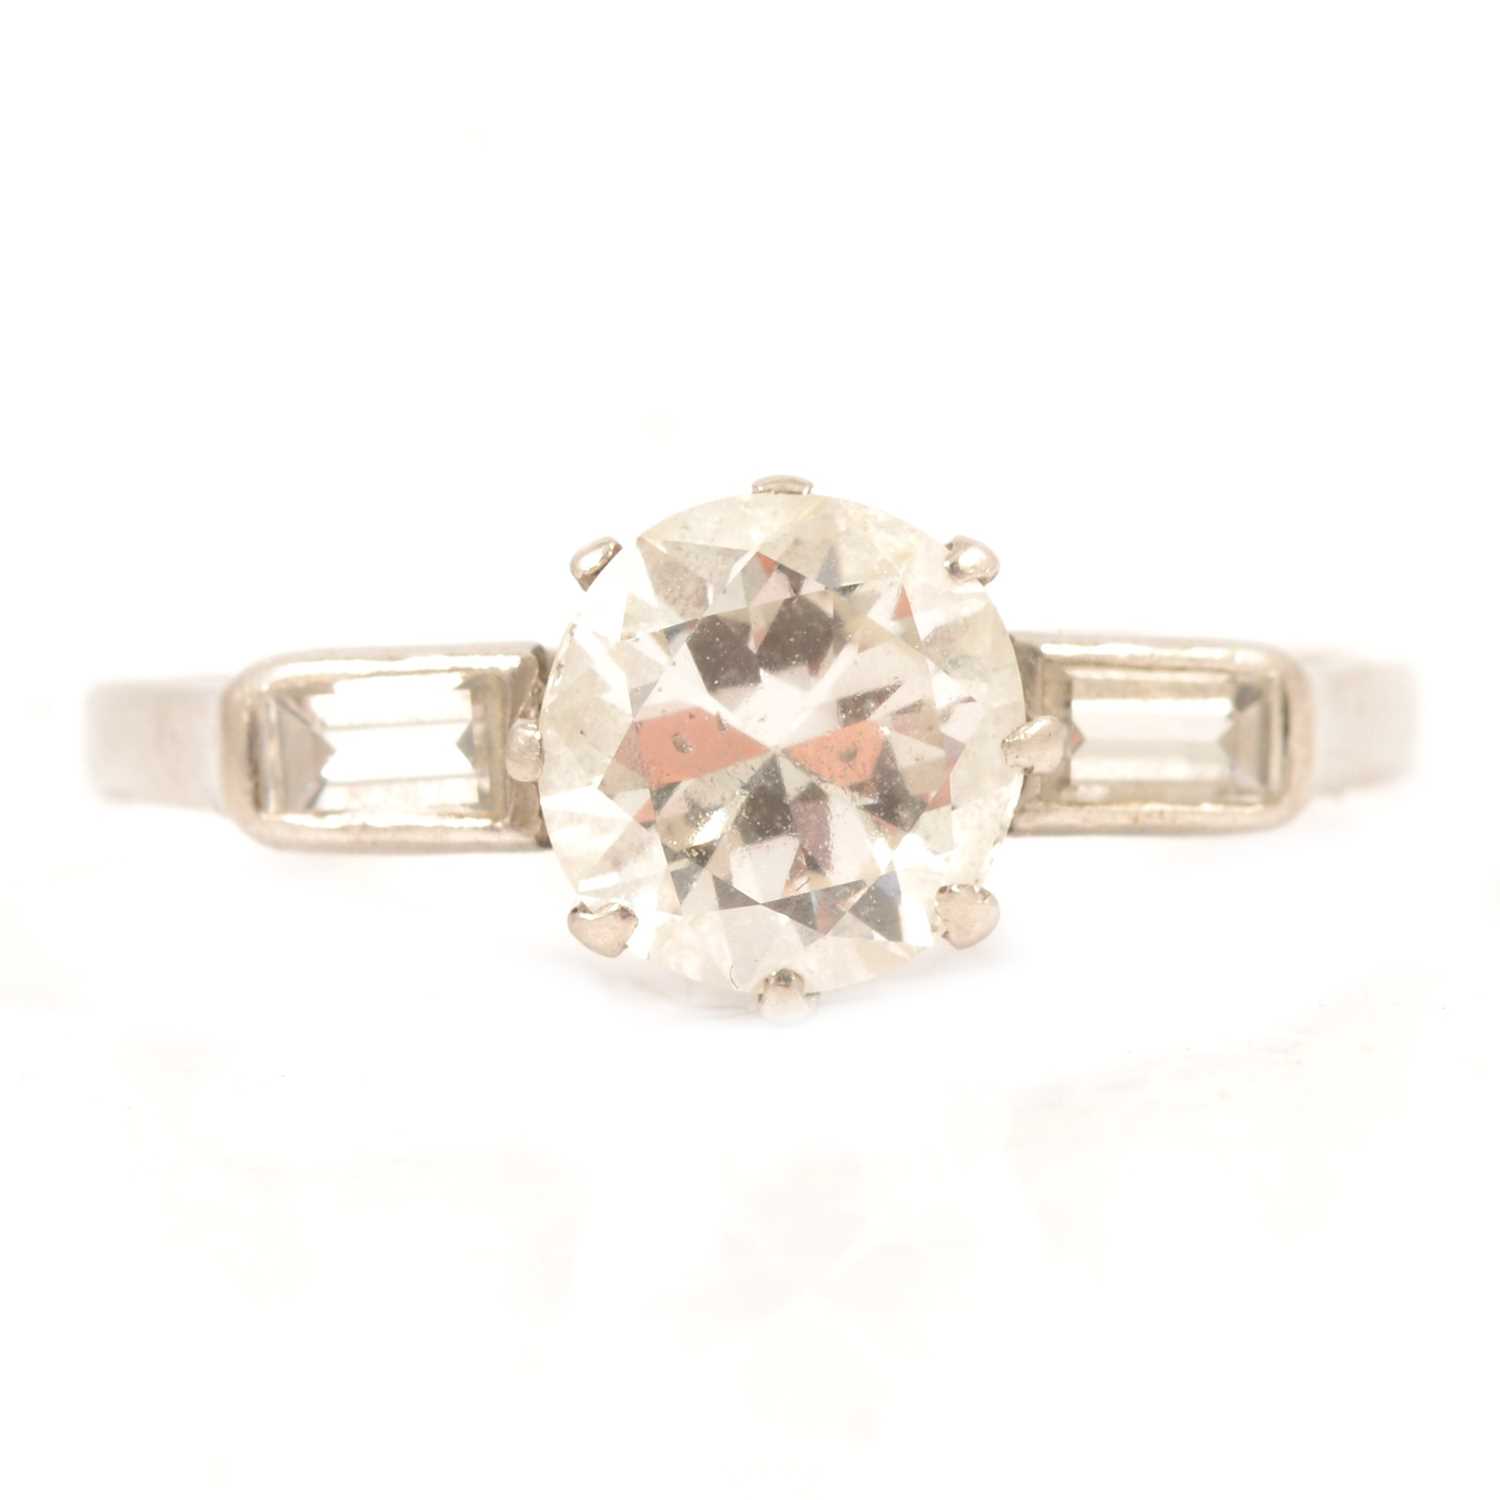 A diamond solitaire ring with baguette cut shoulders.